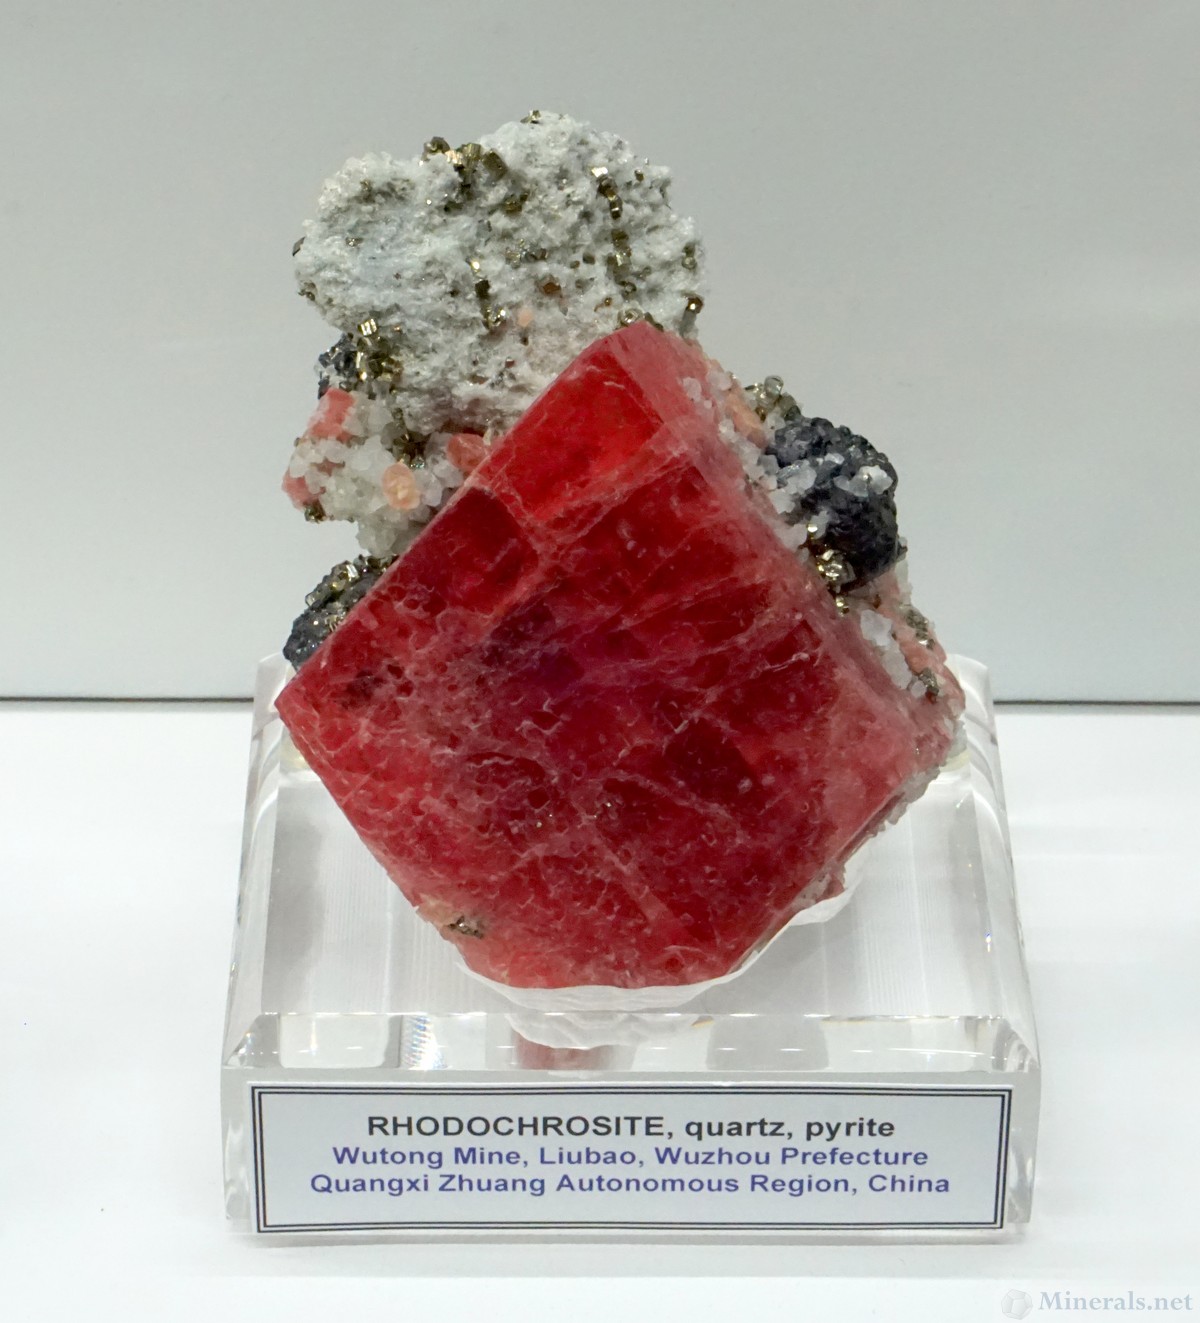 Rhodochrosite - NOT from Colorado, but from the Wutong Mine, China